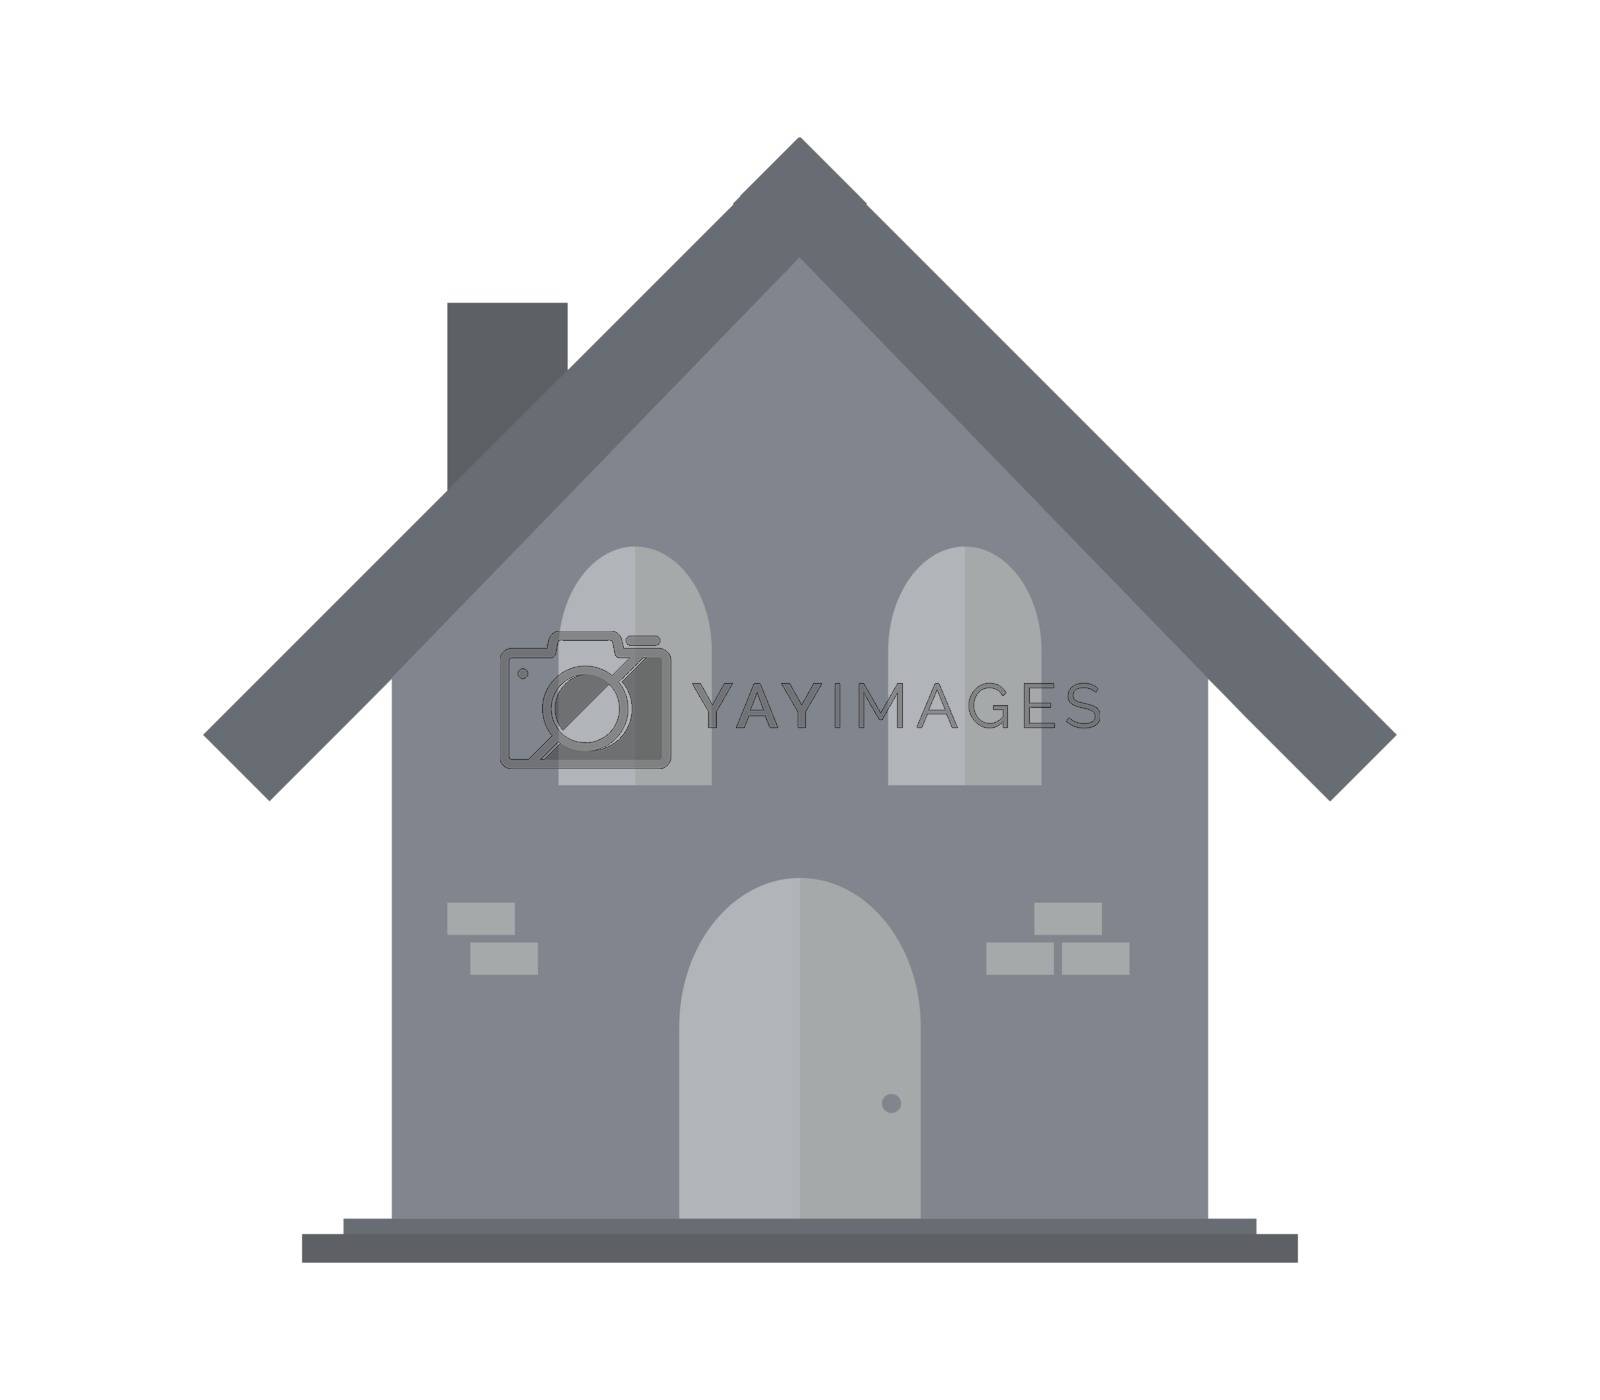 Royalty free image of house icon by Mark1987